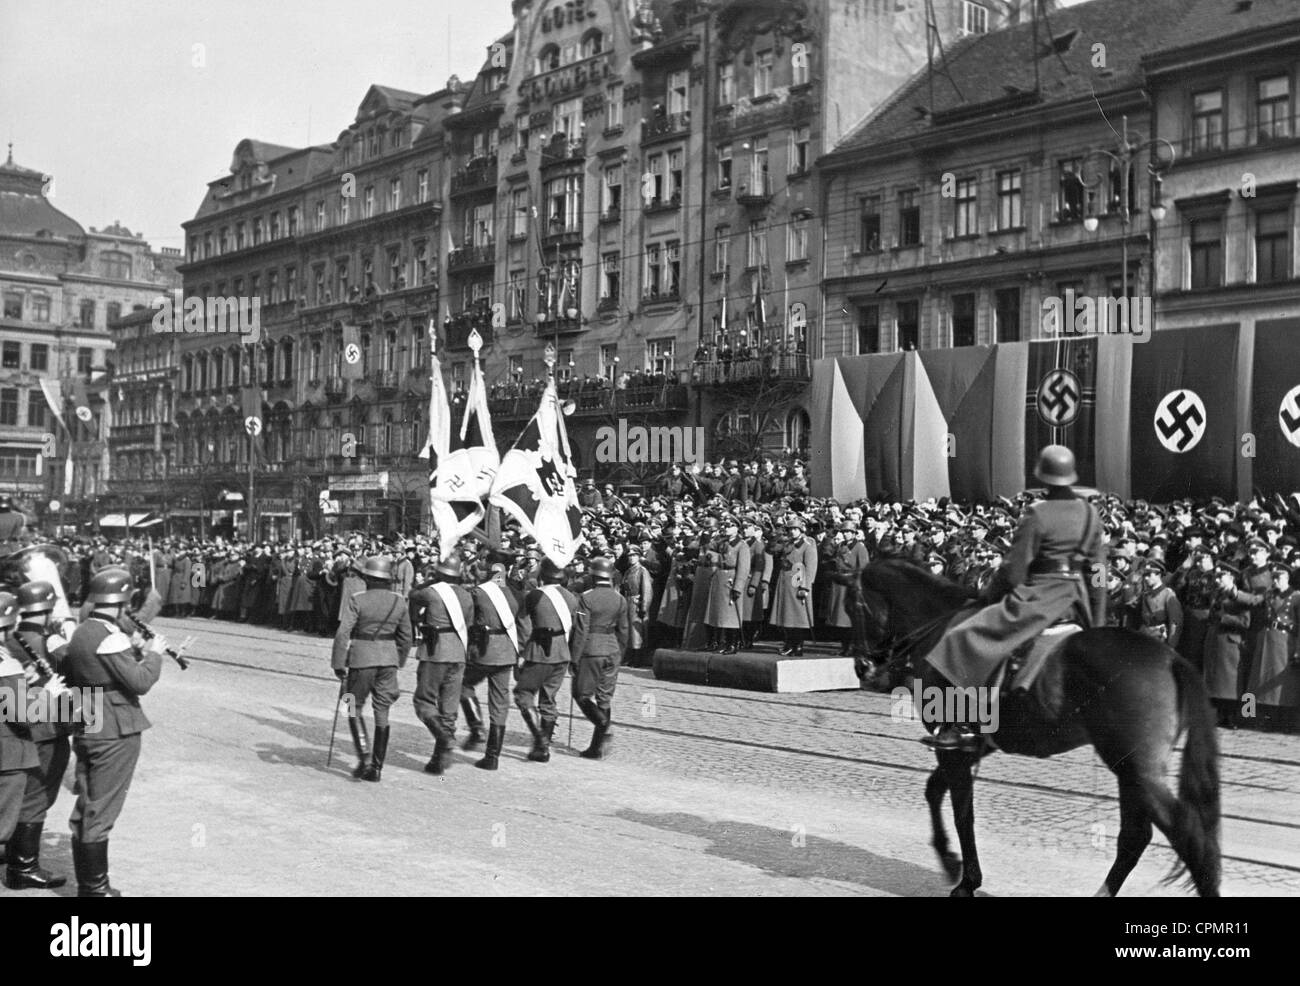 Parade of German troops on the Wenceslas Square in Prague, 1939 Stock Photo - Alamy